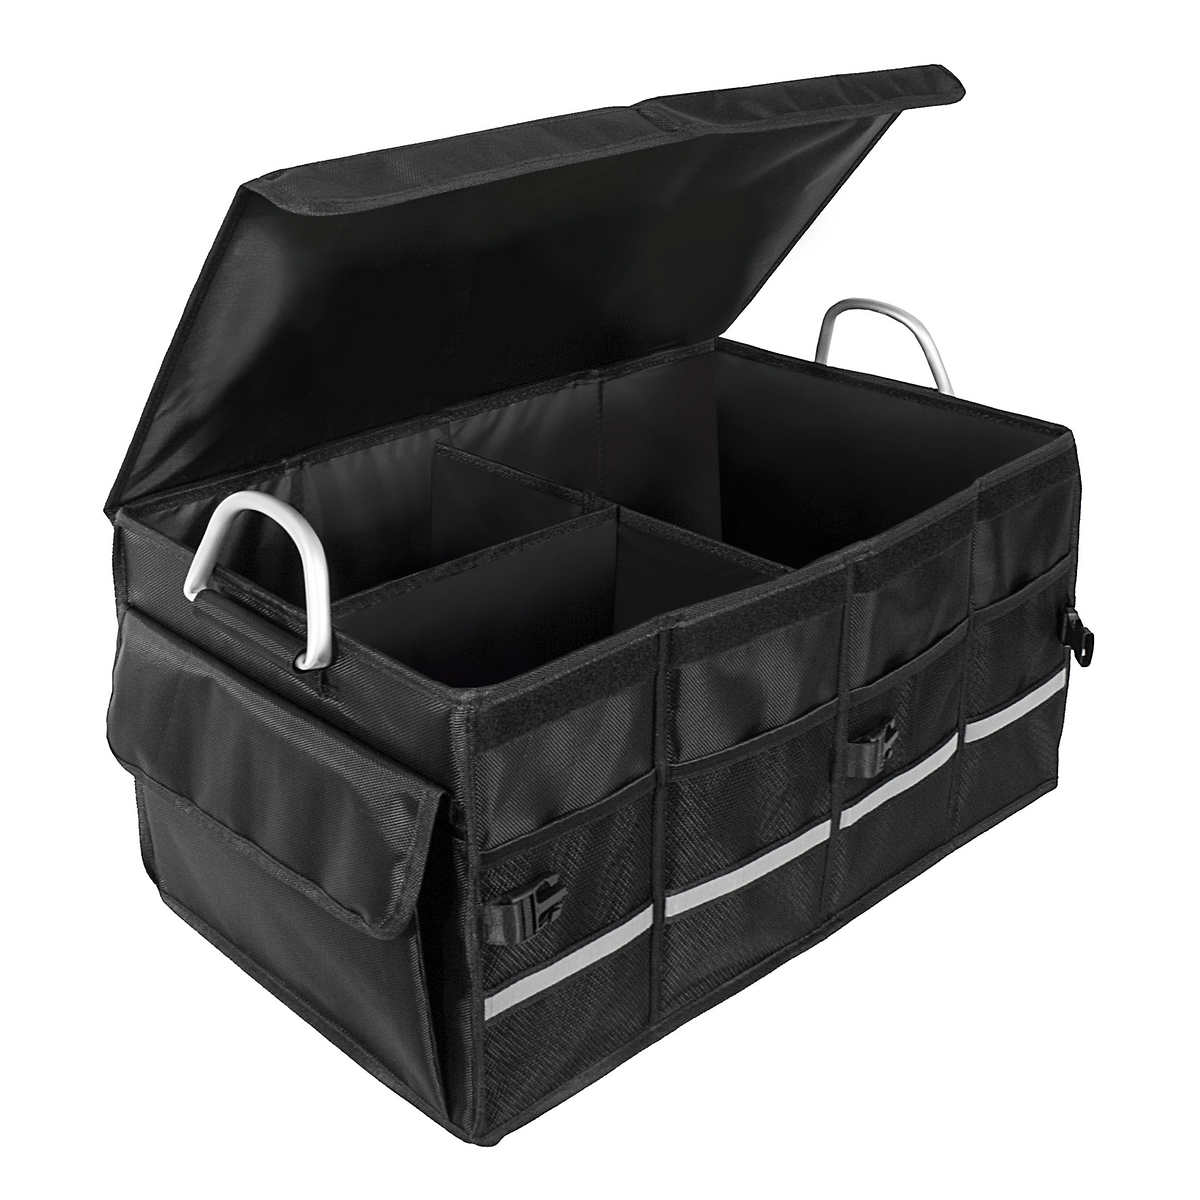 Cheap Portable Foldable Car Trunk Organizer Felt Cloth Storage Box Case  Auto Interior Stowing Tidying Container Bags